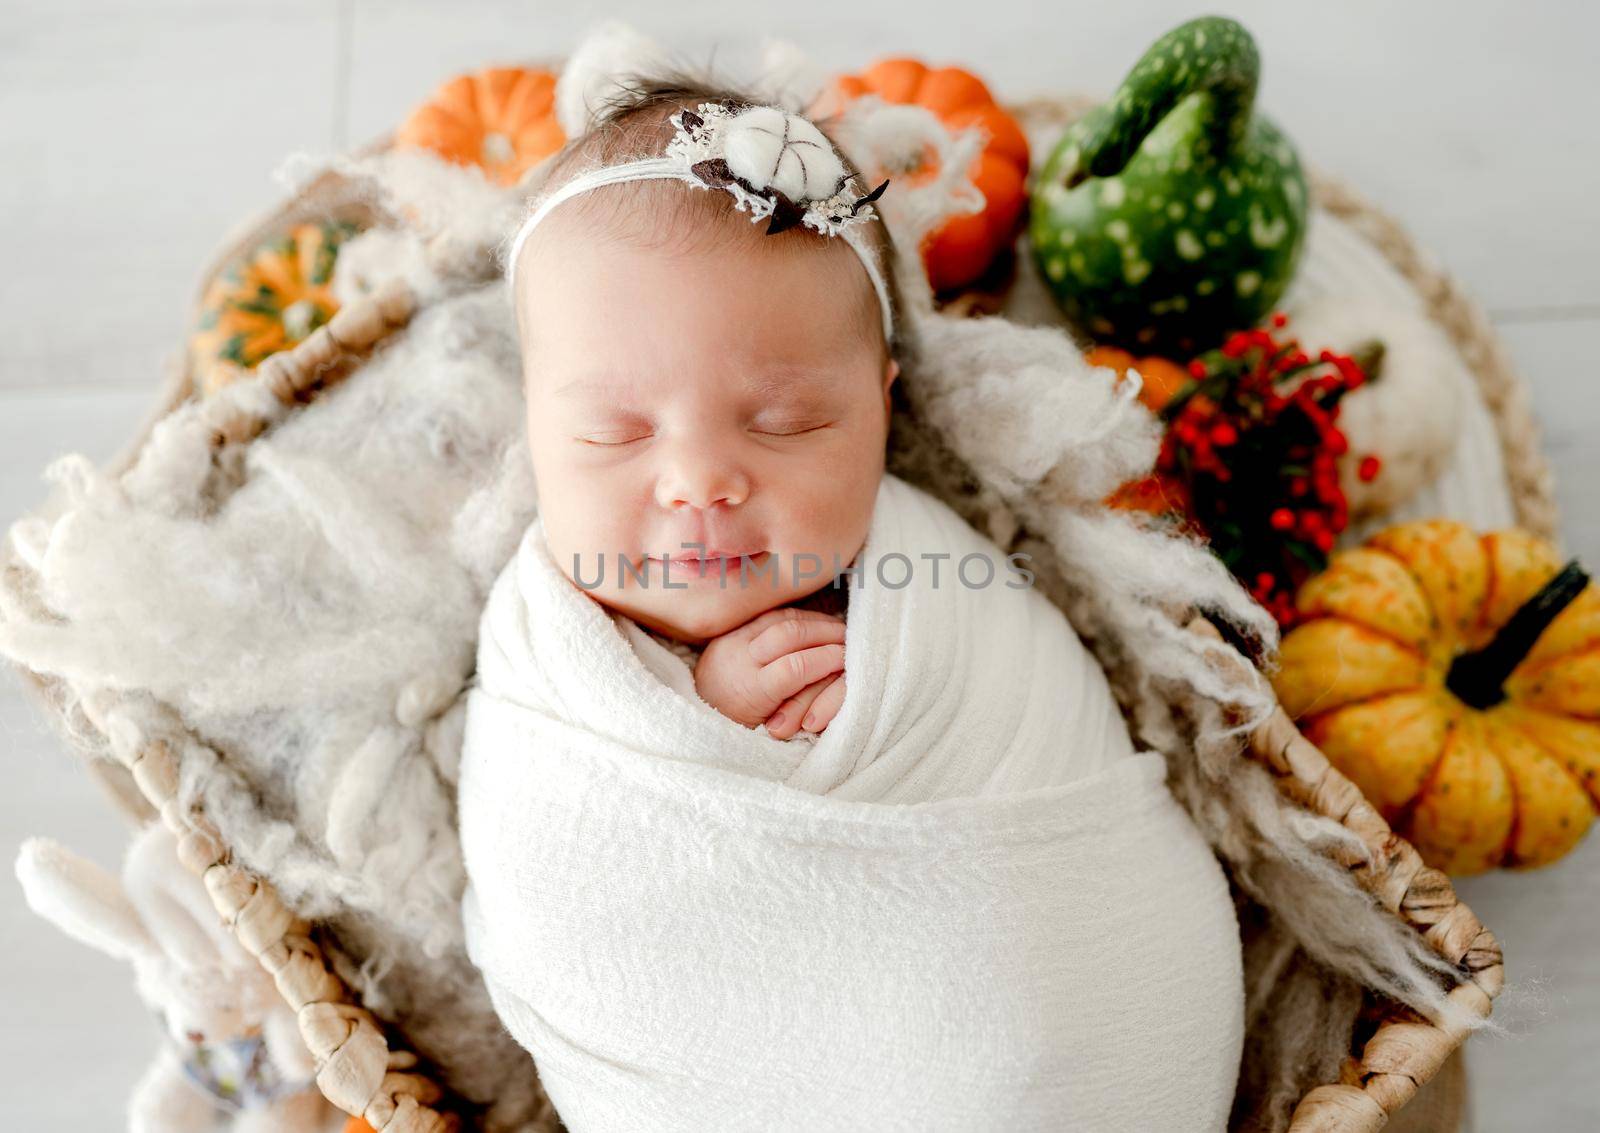 Newborn baby girl swaddled in white fabric sleeping in basket decorated with pumpkins. Infant child kid napping on fur autumn studio portrait